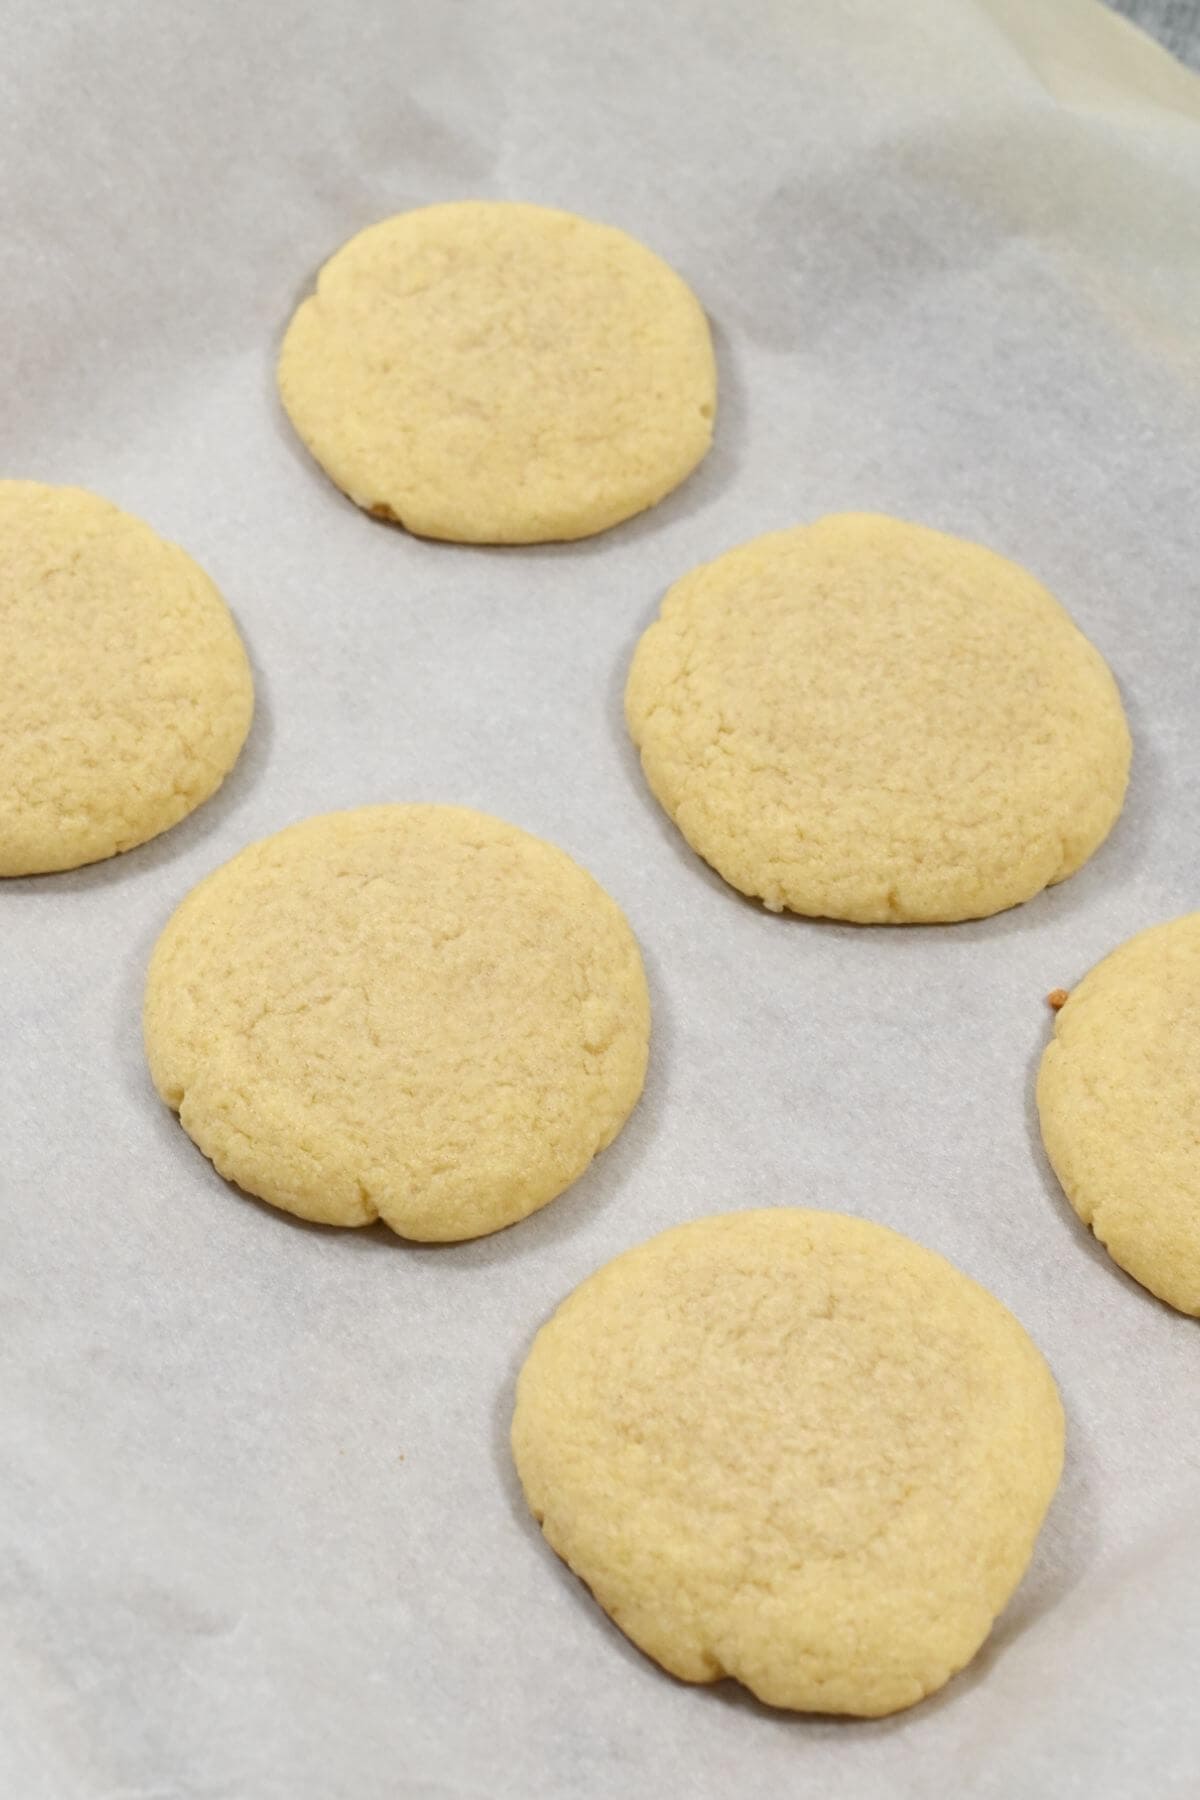 Freshly baked cookies cooling on parchment paper.